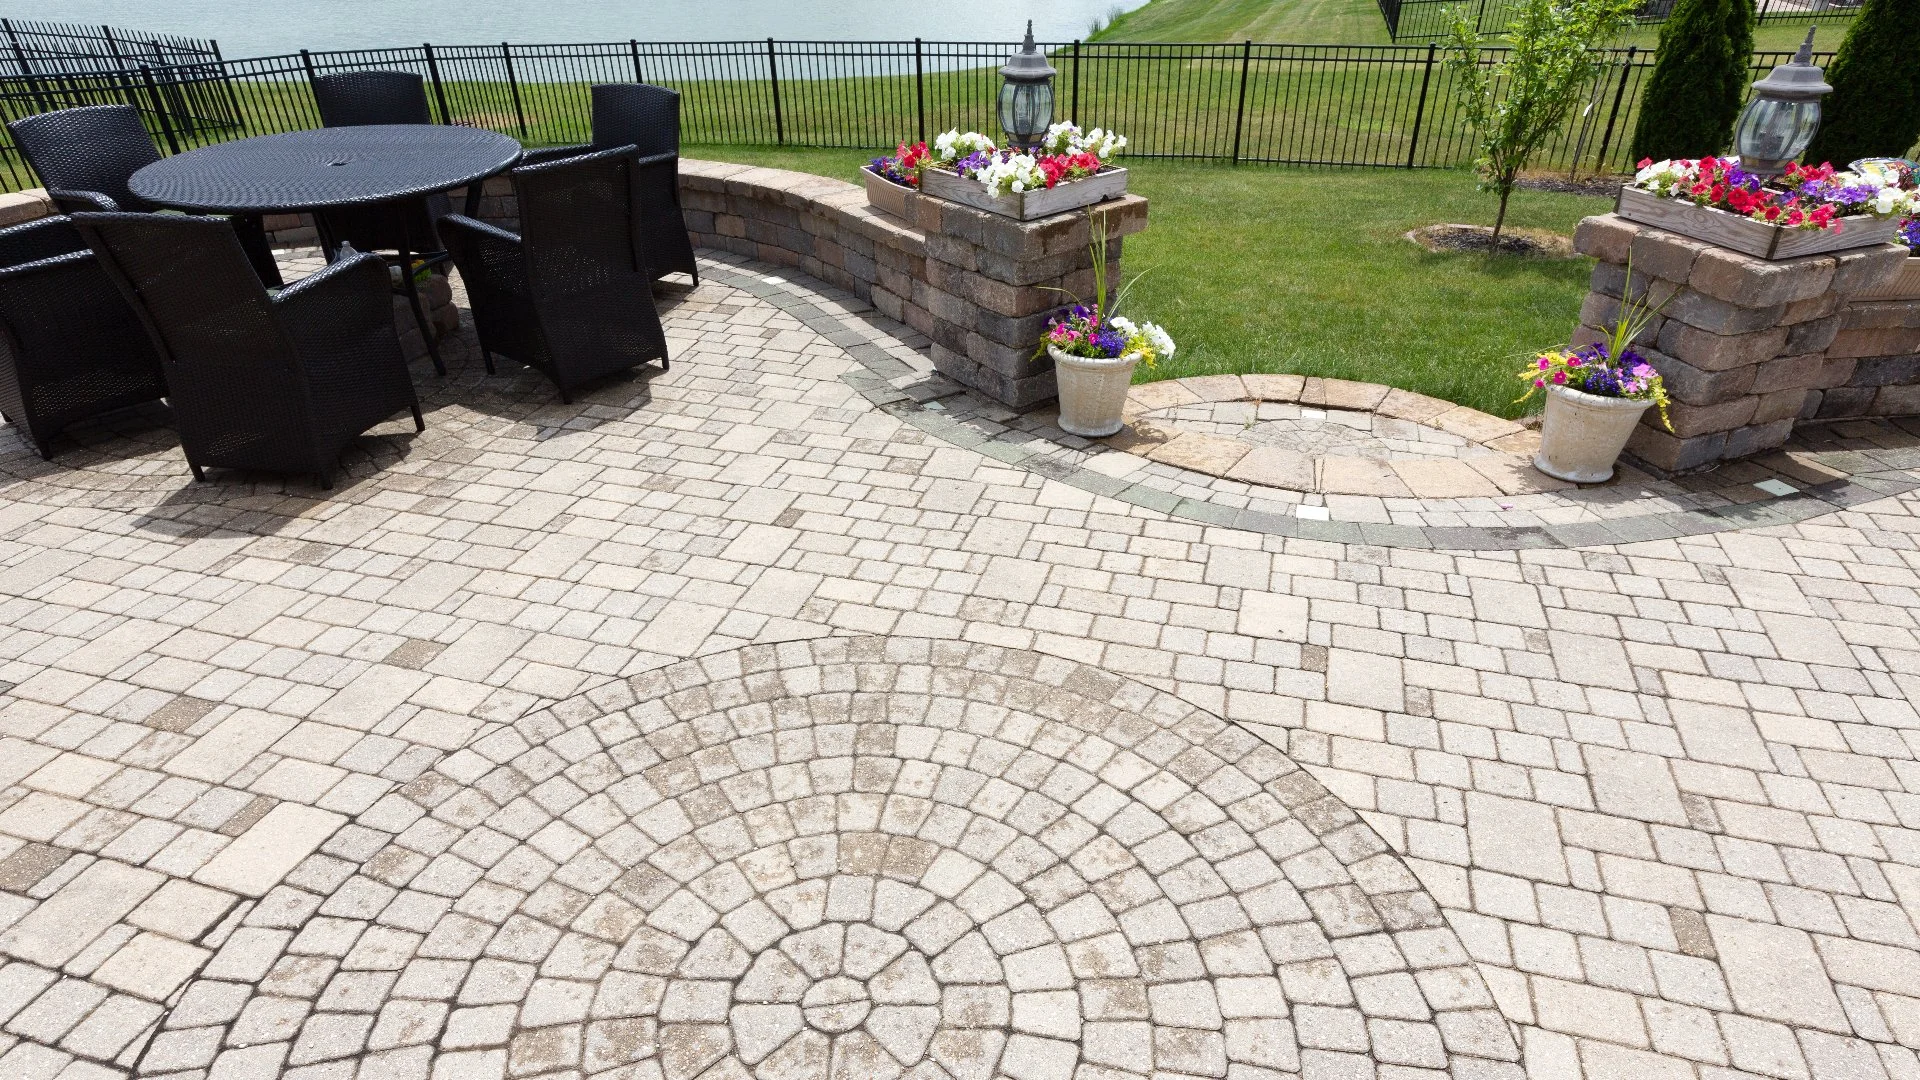 Consider These Paver Patterns When Designing Your New Patio